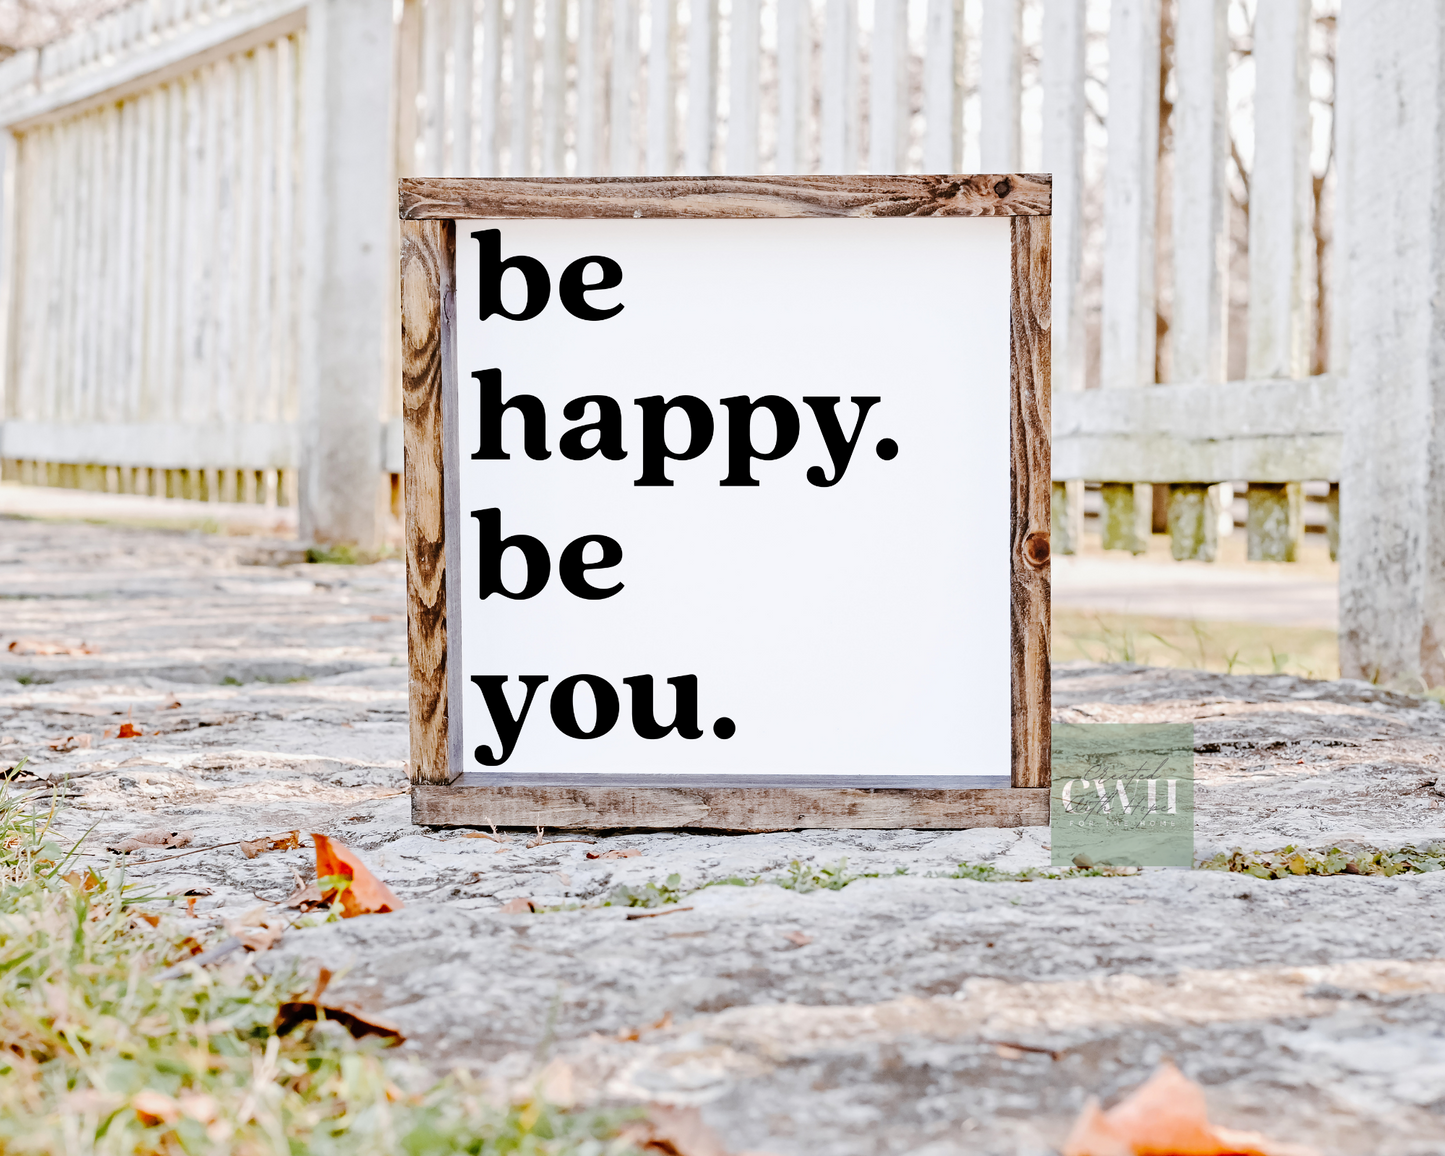 be happy, be you.